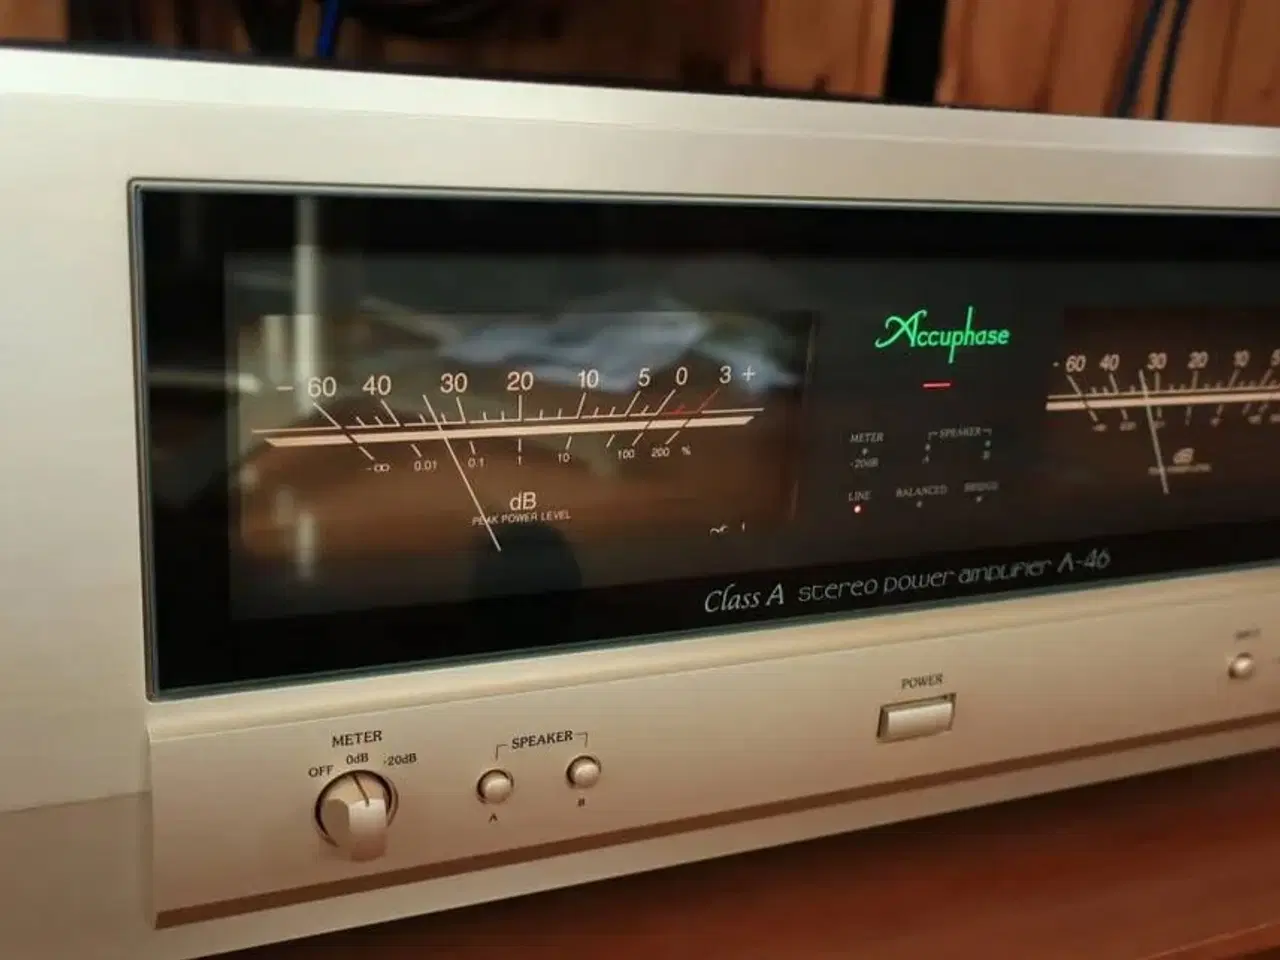 Billede 4 - Accuphase A-46 amplifier